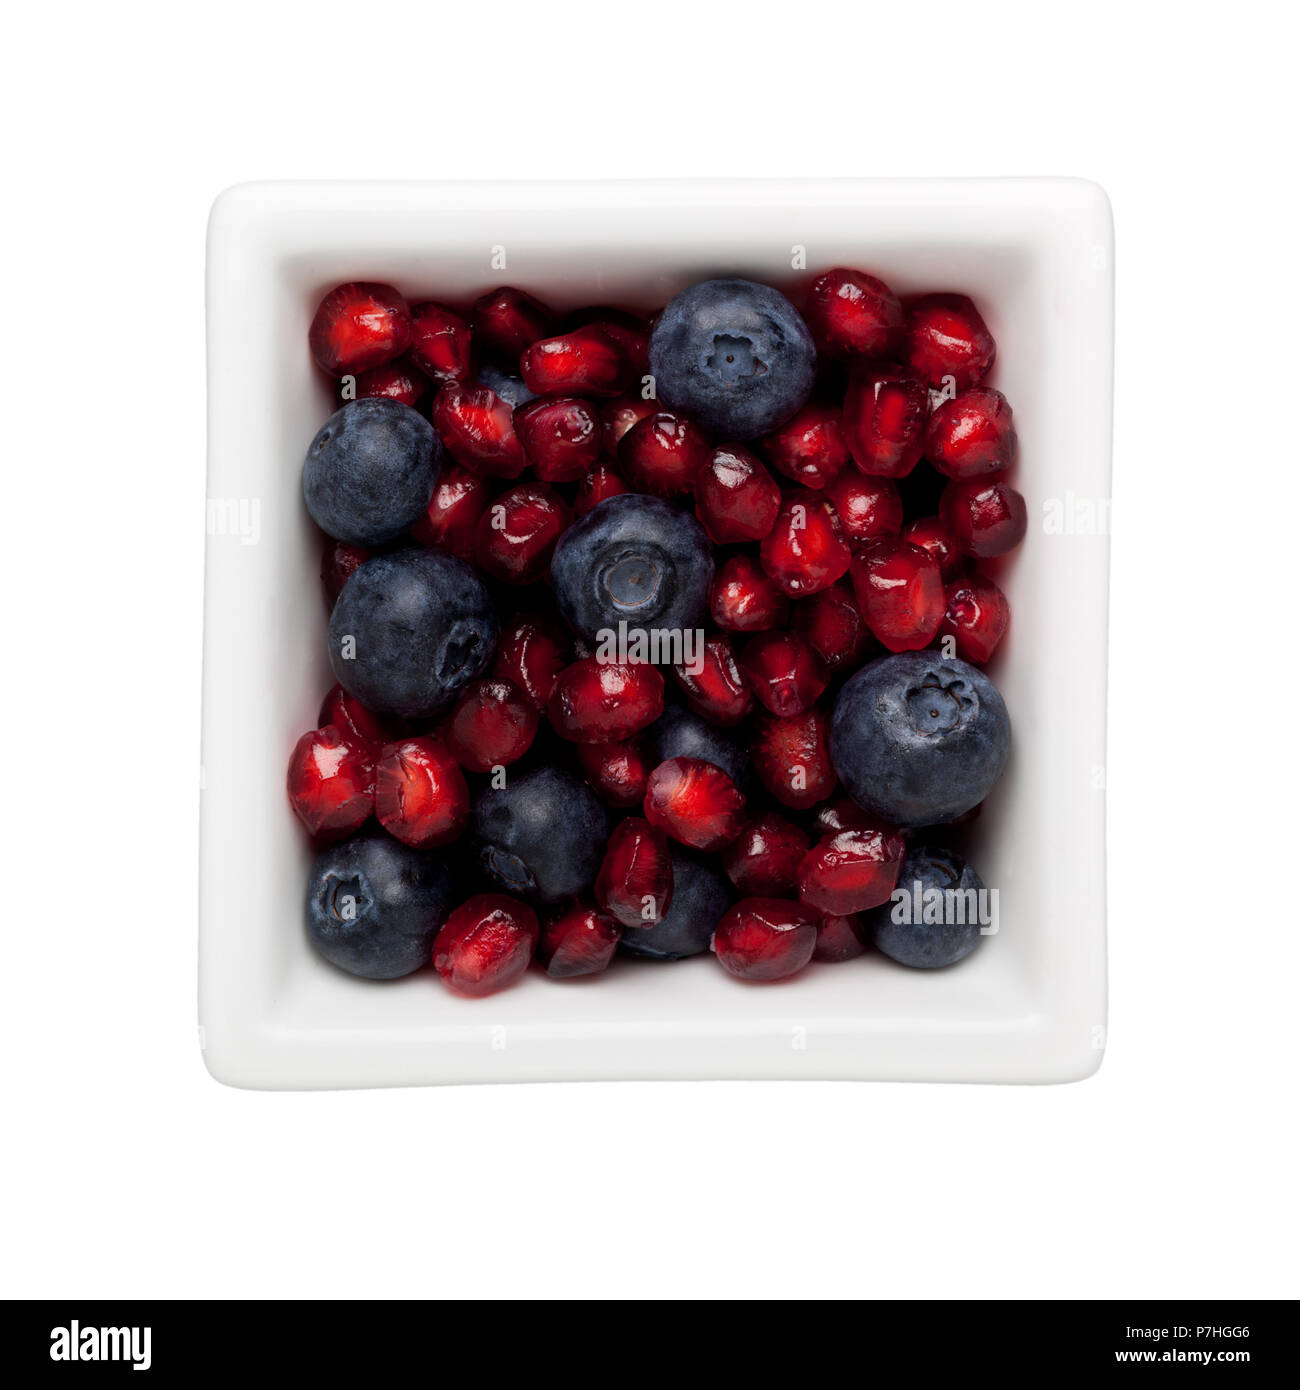 Pomegranate arils and blueberries in a square bowl isolated on white background Stock Photo